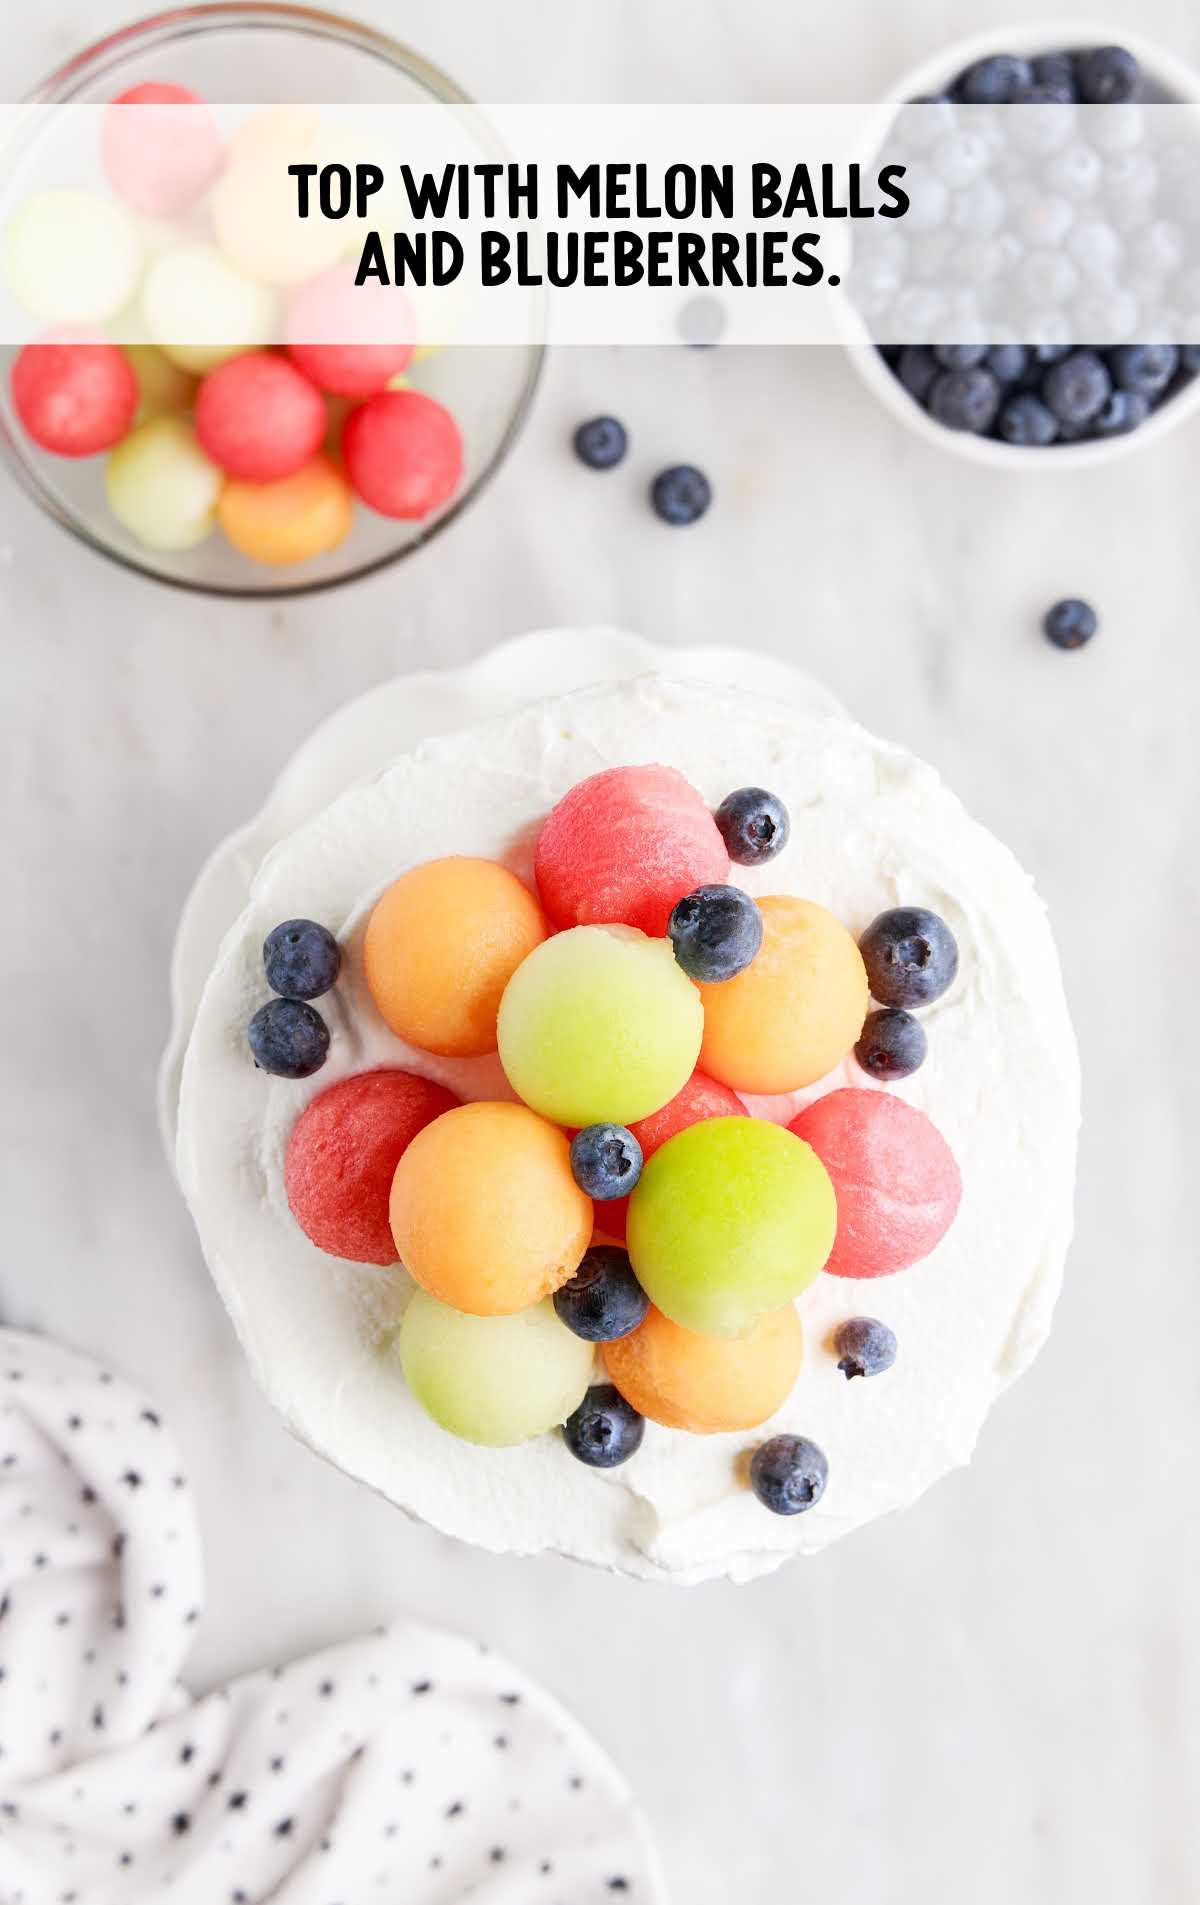 cake topped with melon balls and blueberries